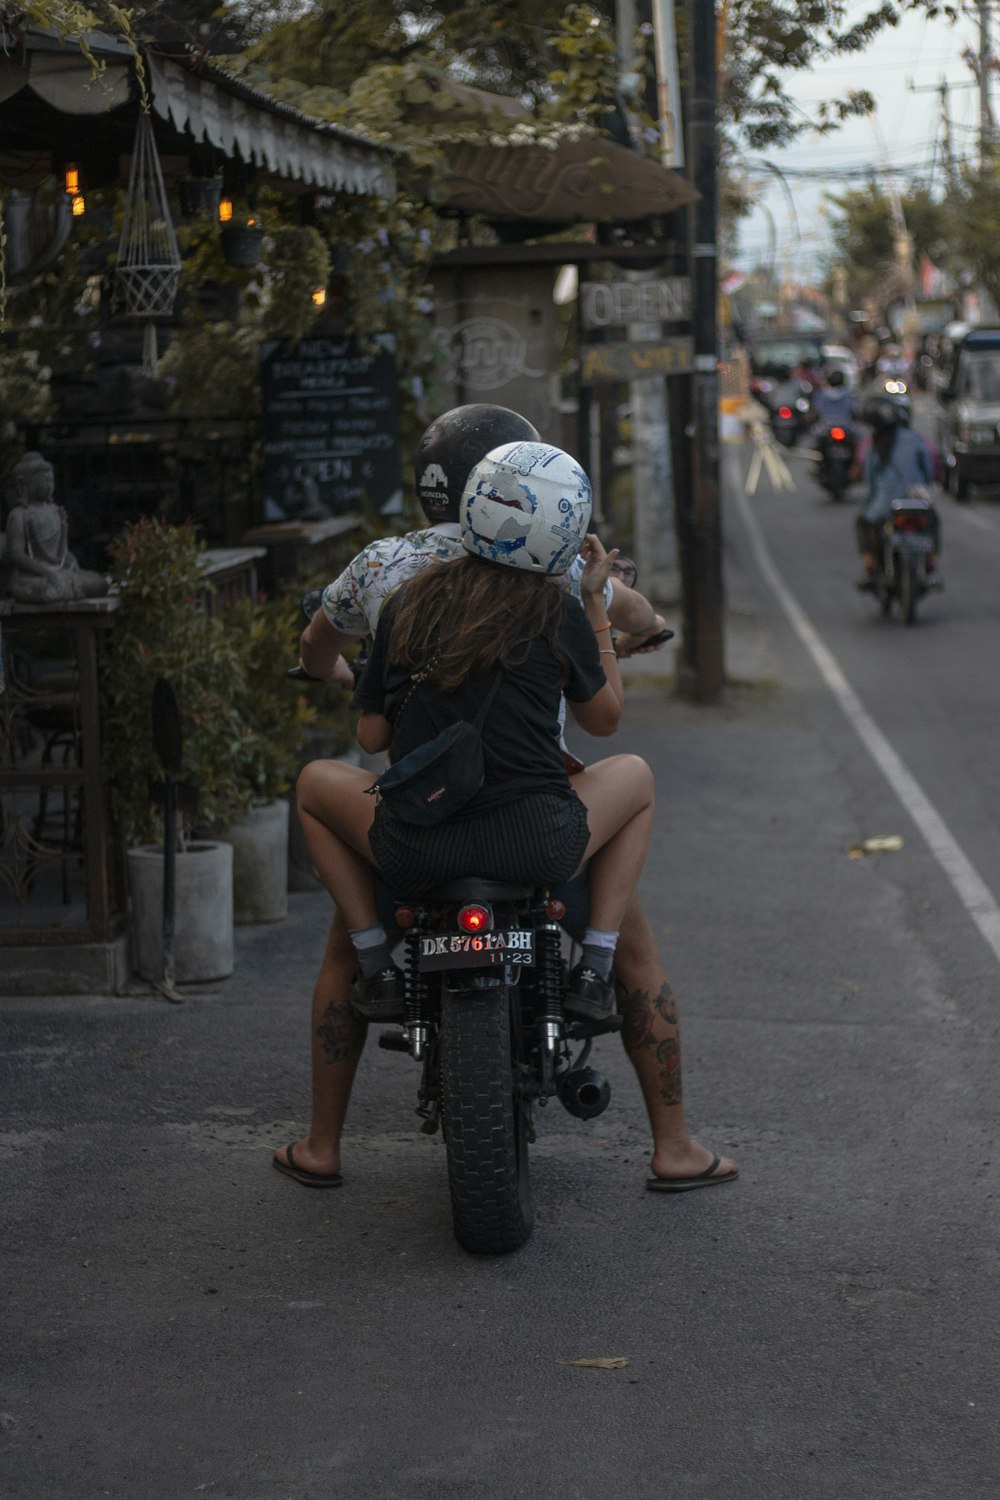 couple riding on the motorcycle